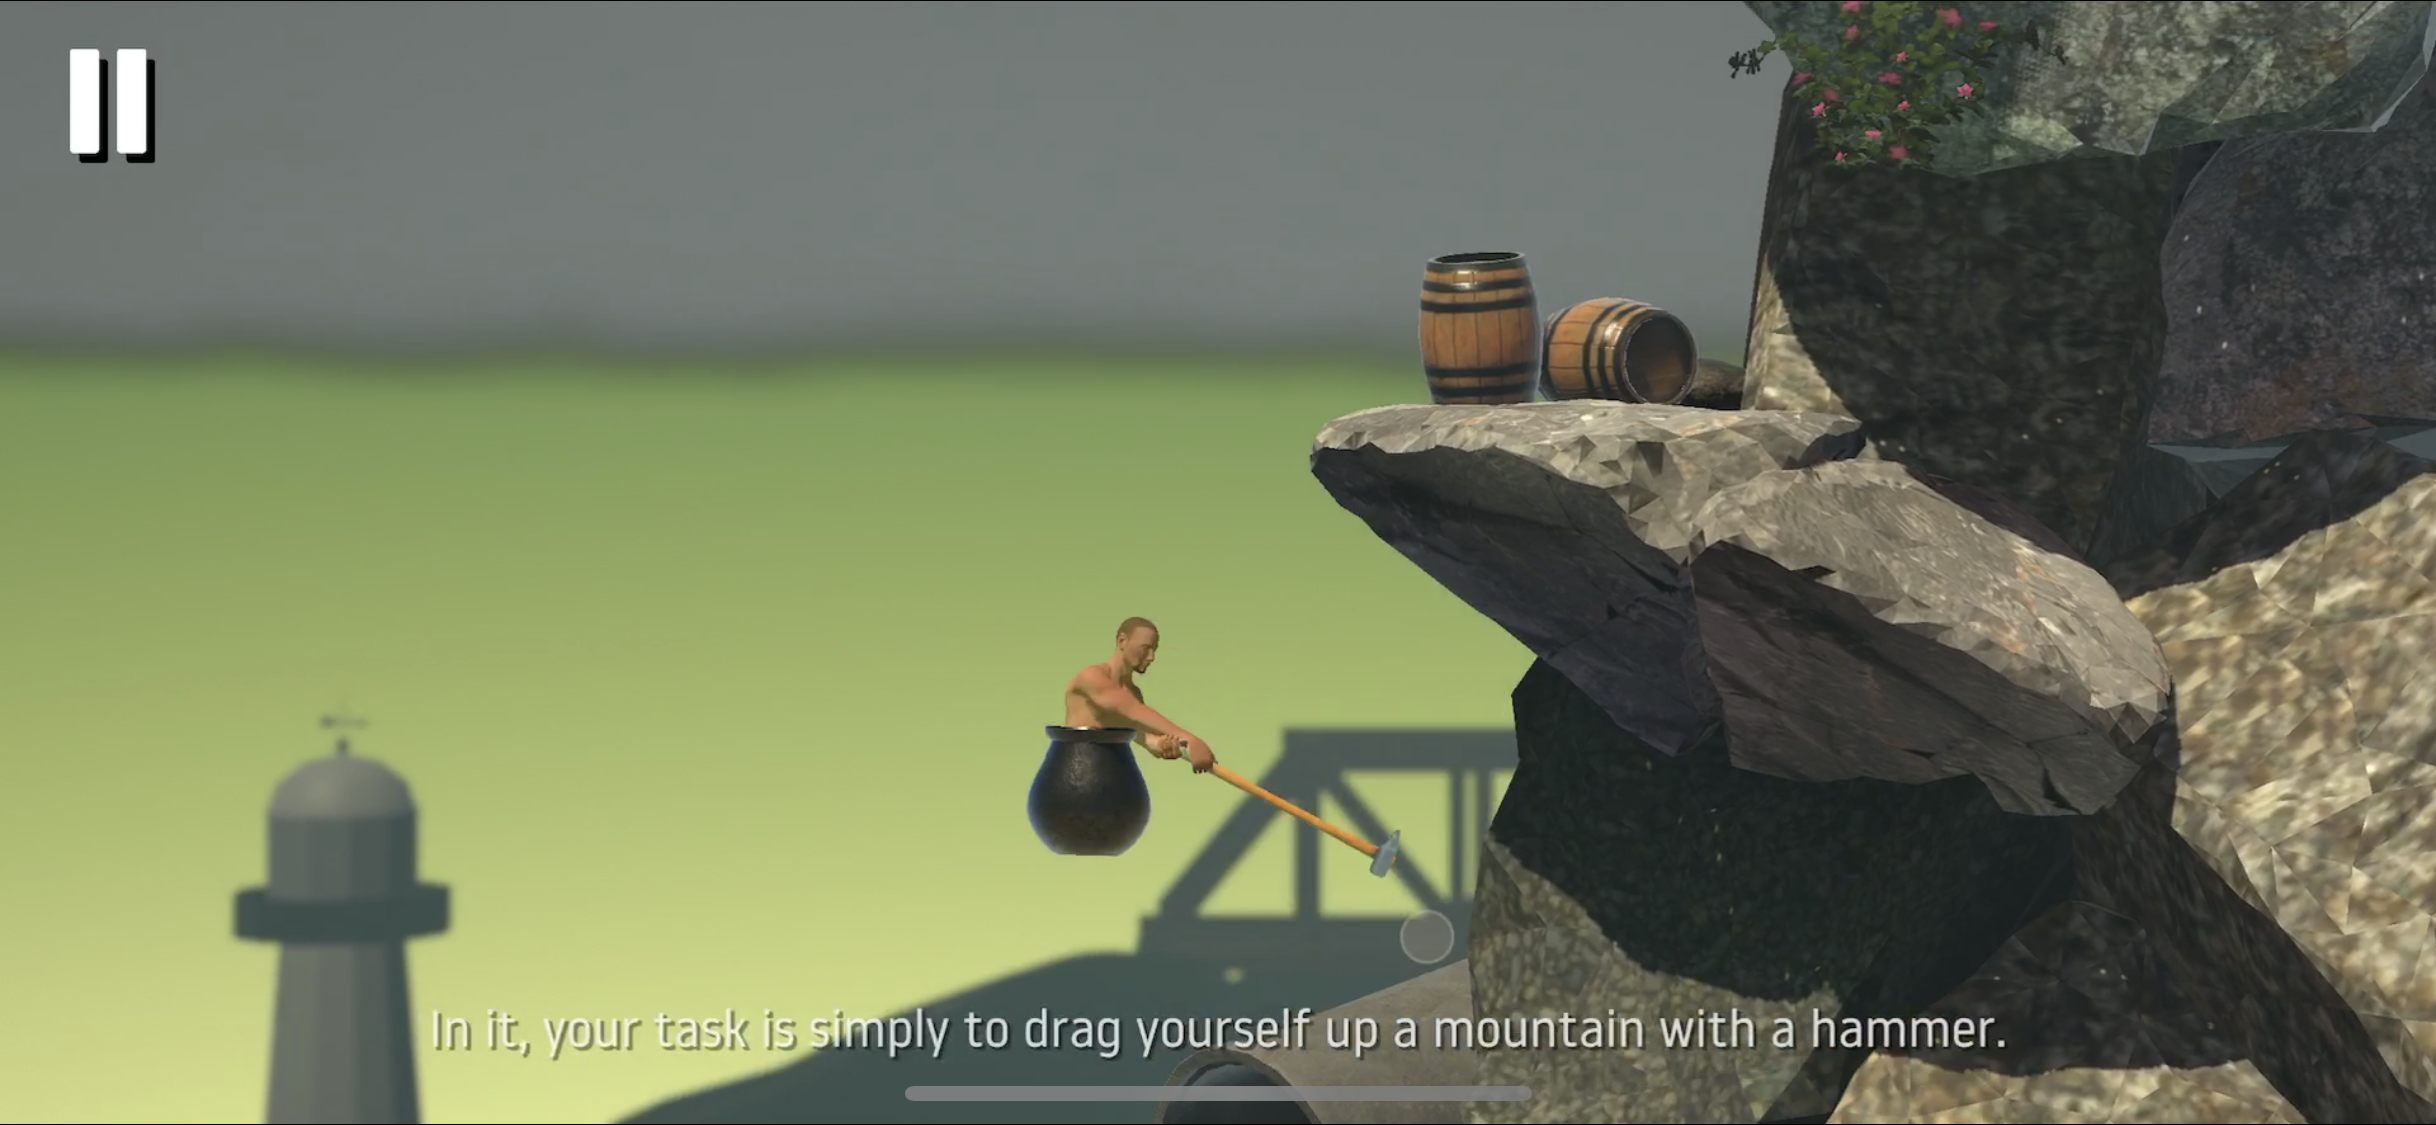 Getting Over It - Play Getting Over It On OVO Game